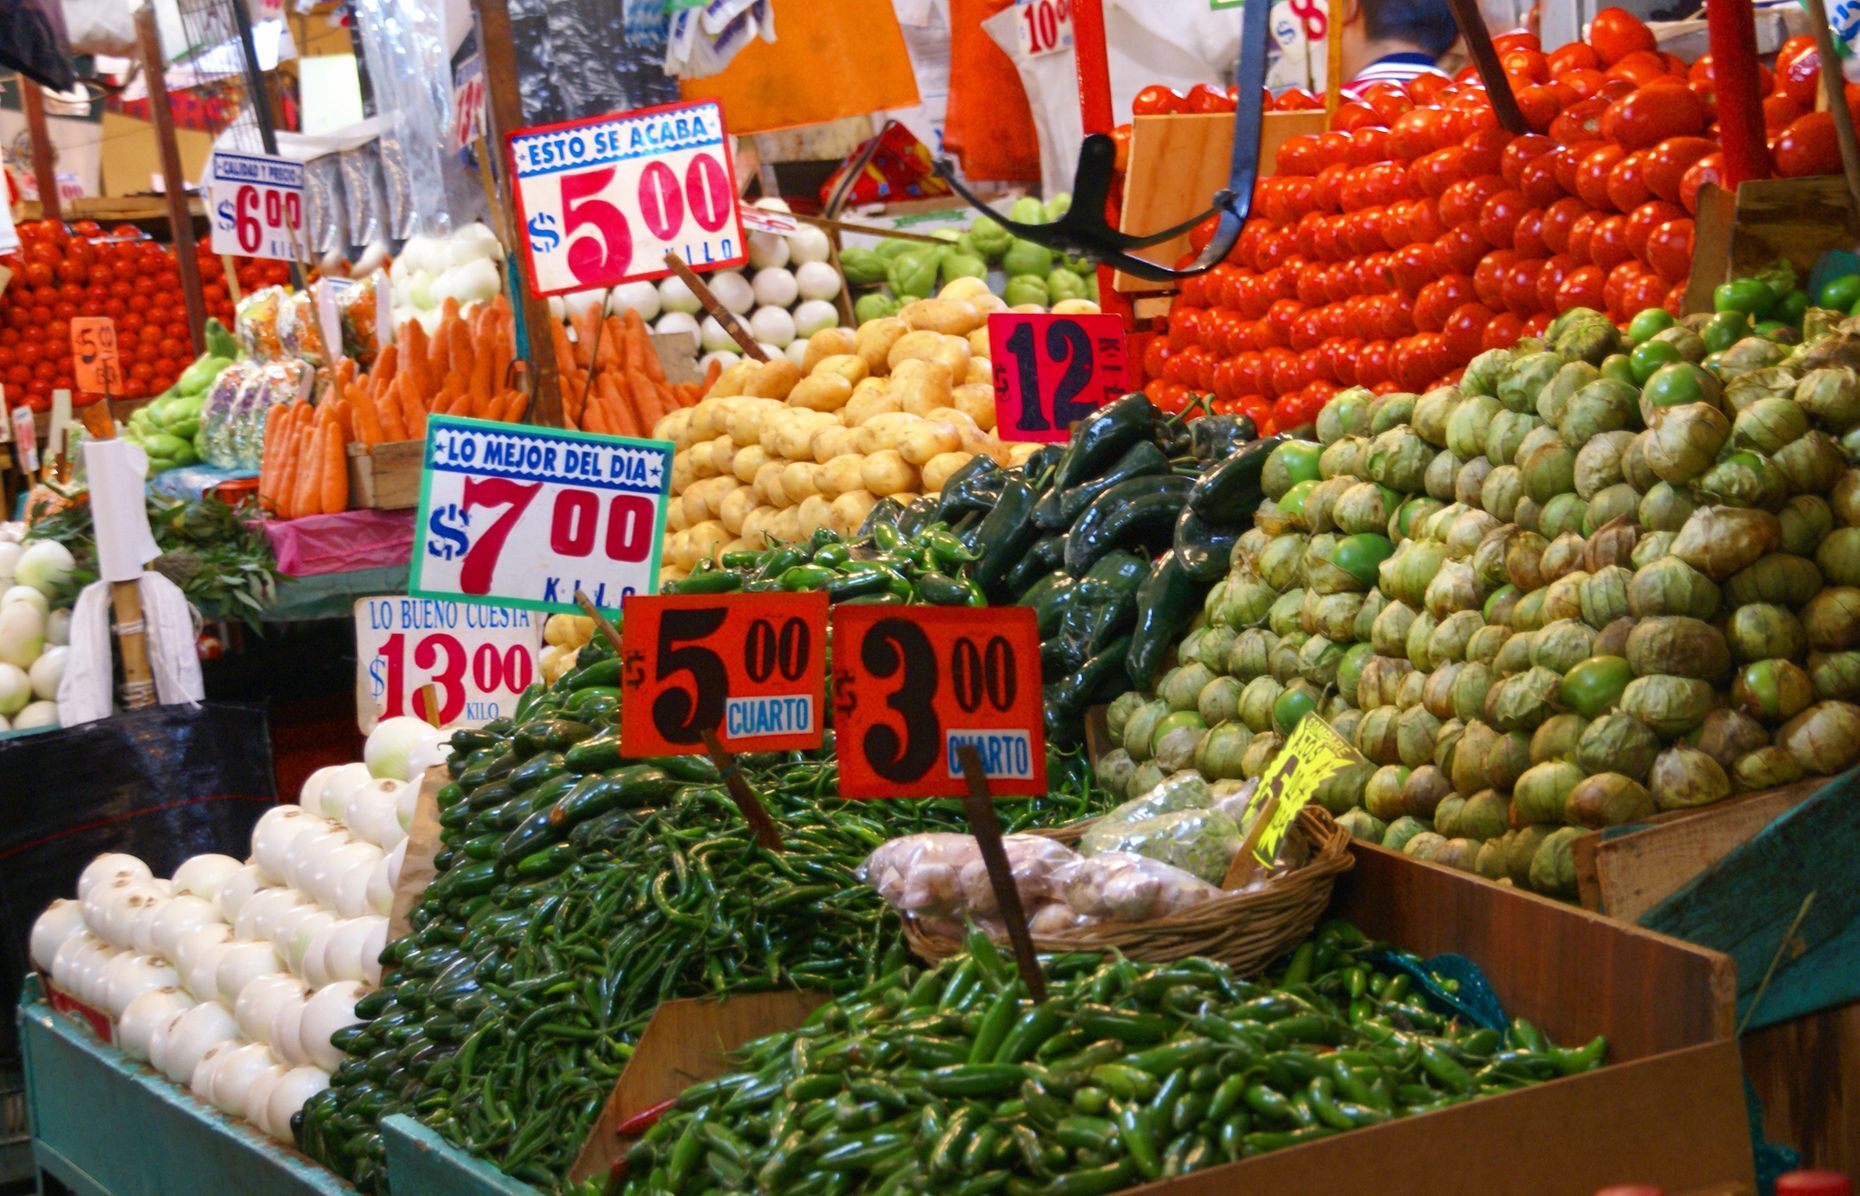 Monthly minimum: $175 You shouldn’t have any trouble finding great, inexpensive food in Mexico’s capital. According to <a href="https://www.investopedia.com/articles/personal-finance/111015/how-much-money-do-you-need-live-mexico-city.asp" rel="noreferrer noopener">Investopedia</a>, “Grocery stores, bakeries, and markets are located everywhere in Mexico City, making it easy to keep your pantry stocked and your refrigerator full.” And if you’re looking to eat out, you can easily get a meal from a local restaurant or street vendor for just $5.